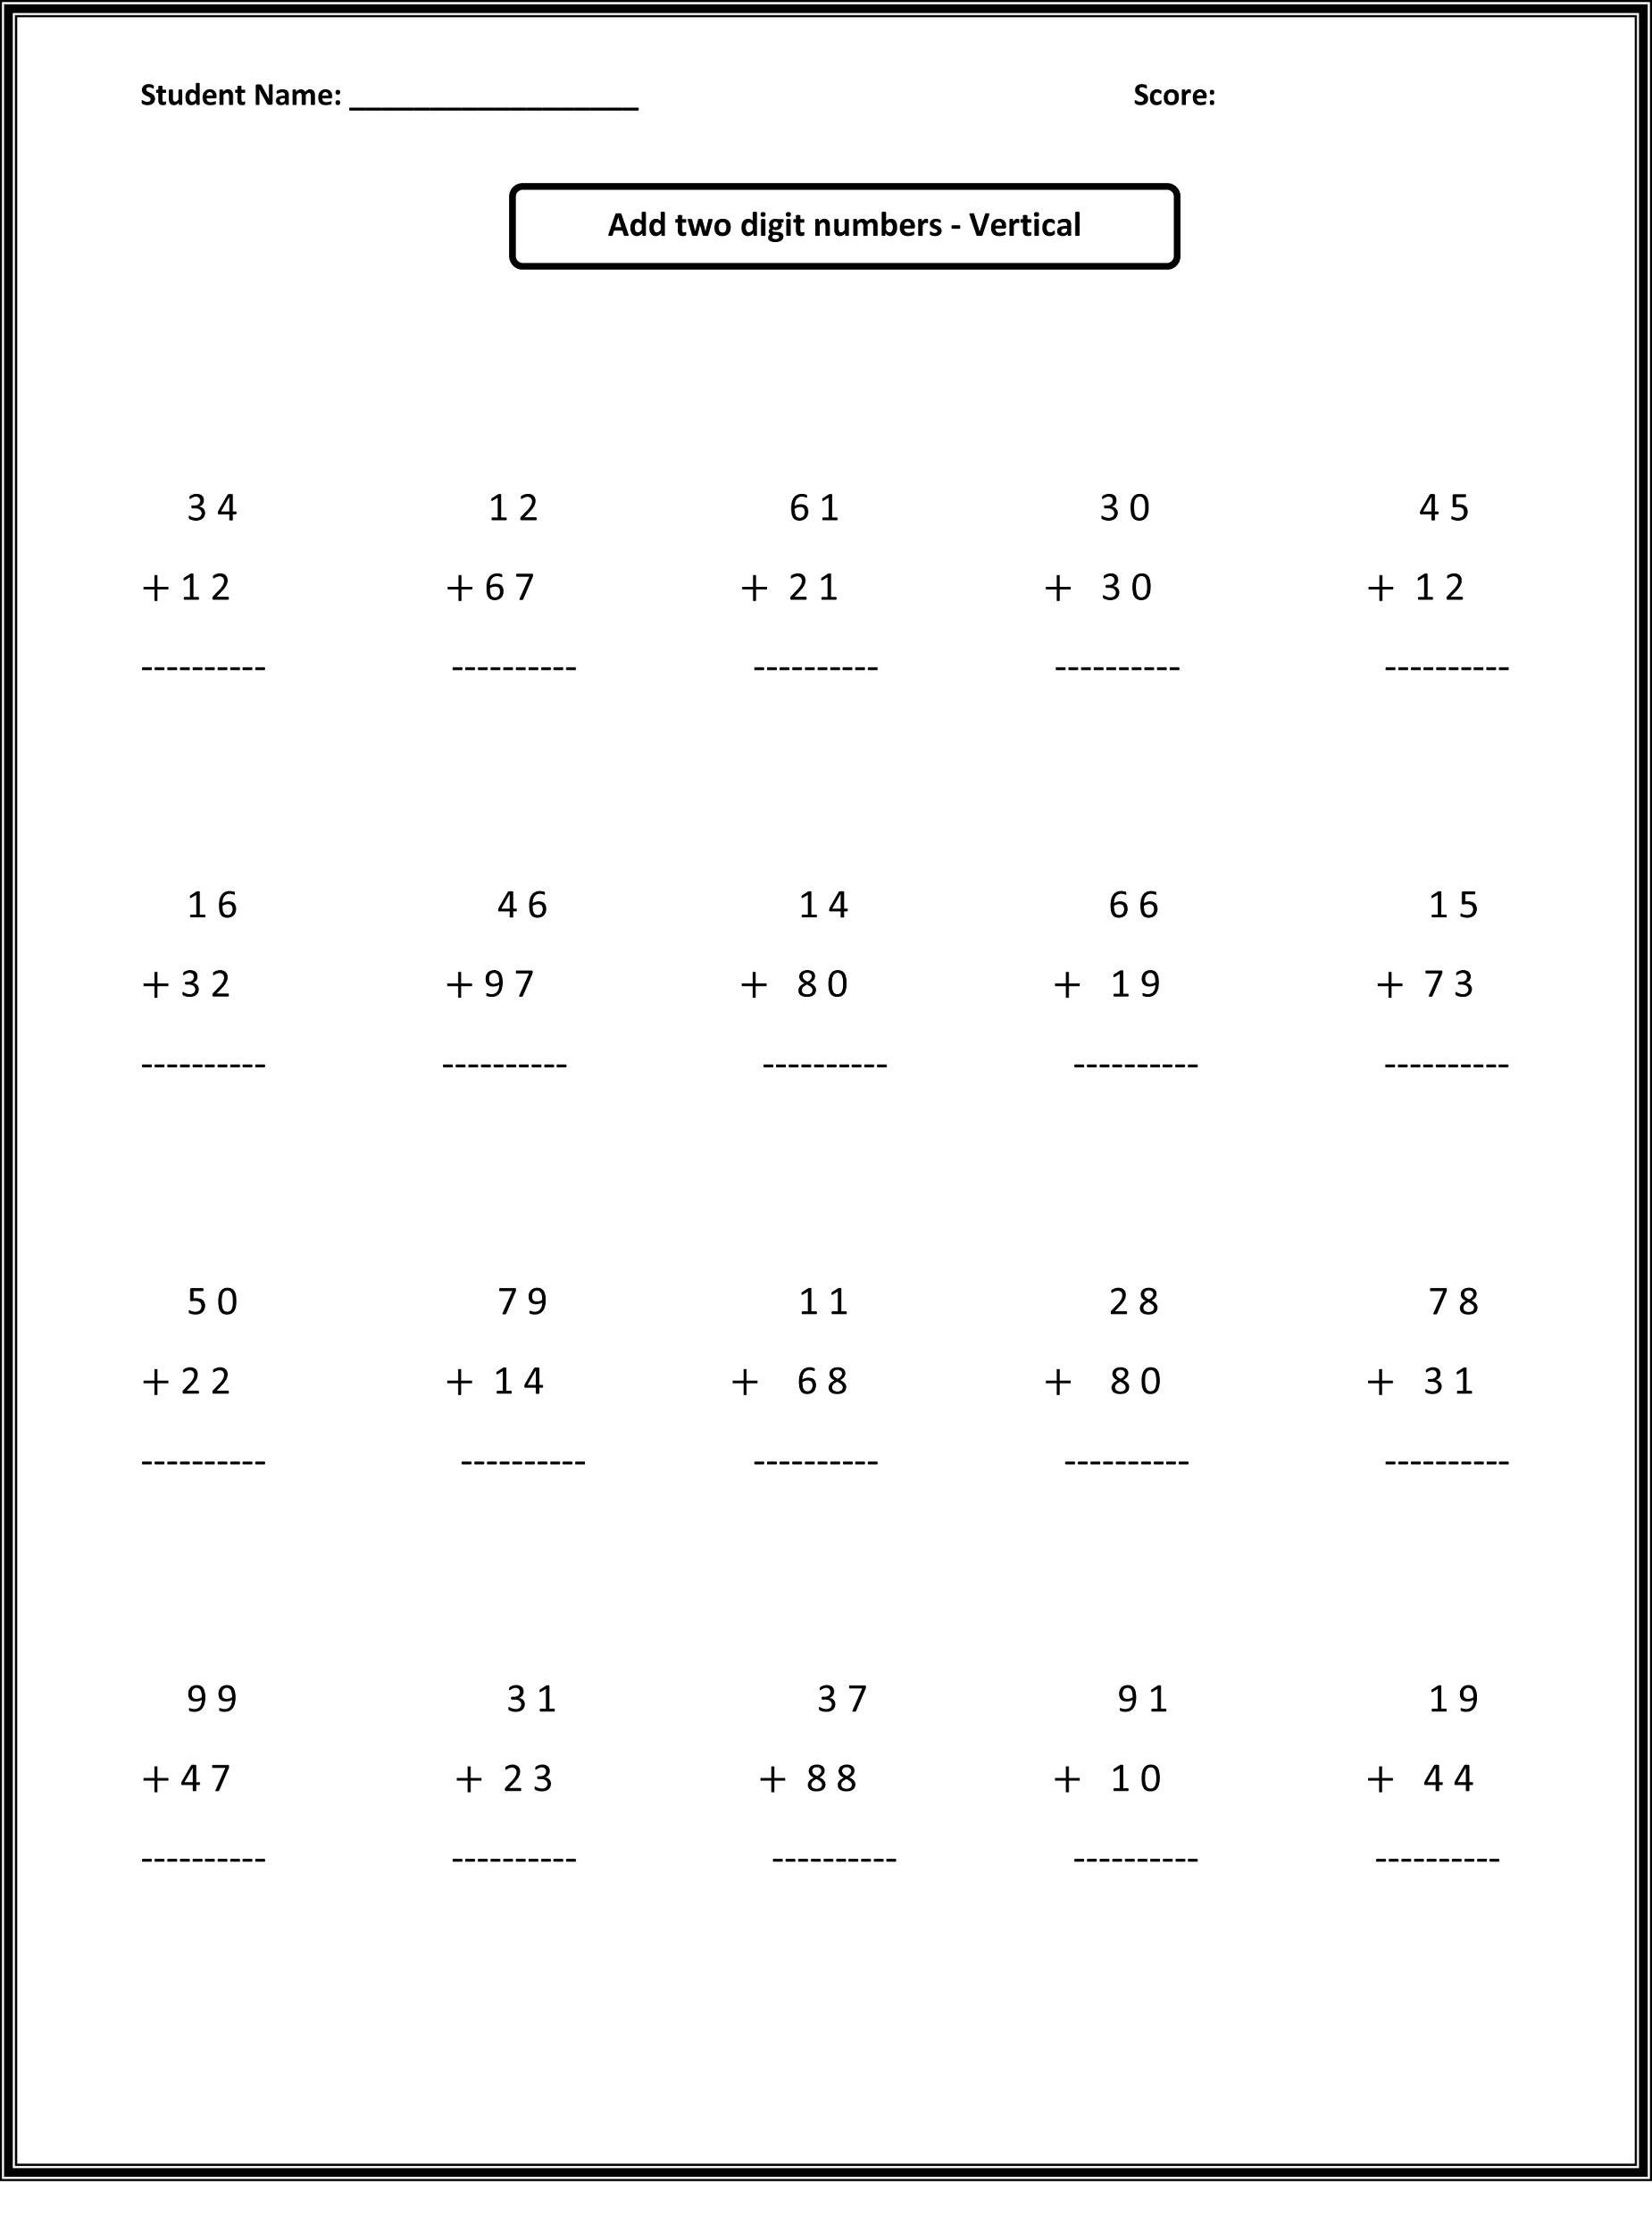 FREE Back to School Math Worksheets for 2nd grade by Shelly Sitz